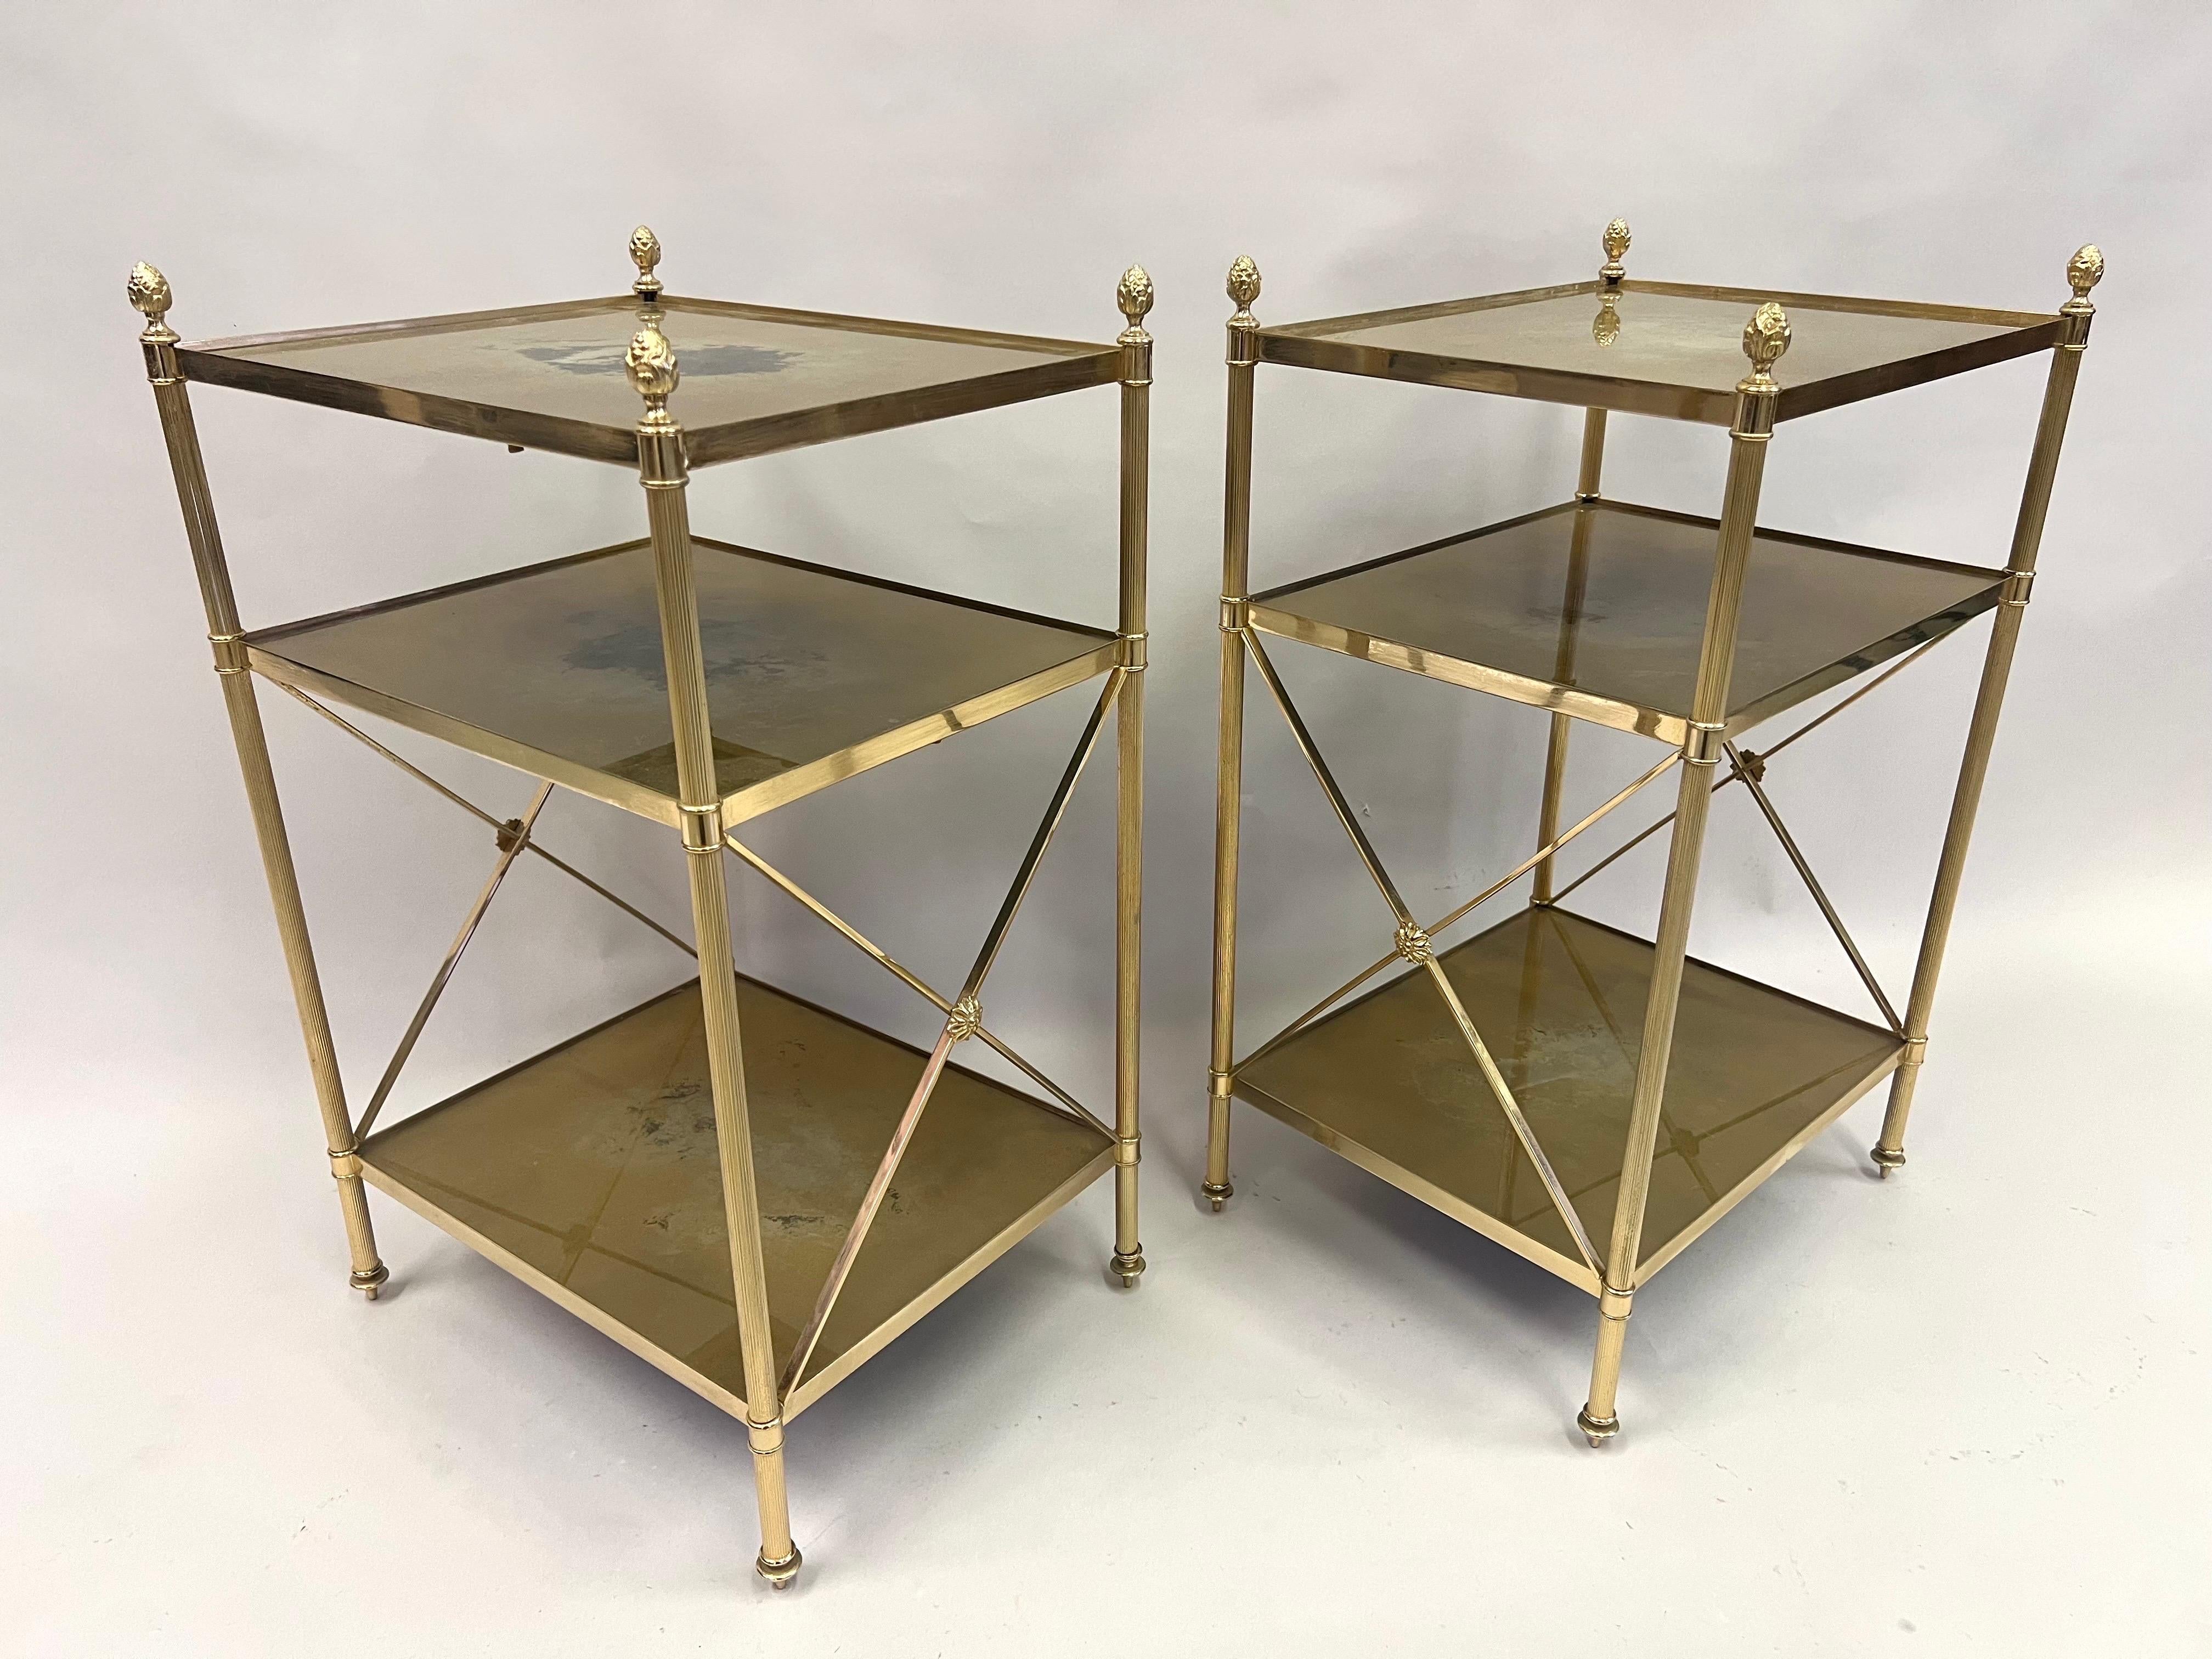 An Elegant and Timeless Pair of French Mid-Century Modern Neoclassical ,triple tier, side / end tables or nightstands in solid brass by Maison Jansen for Maison Bagues. The tables are composed of the highest quality solid brass frames with 3 inset